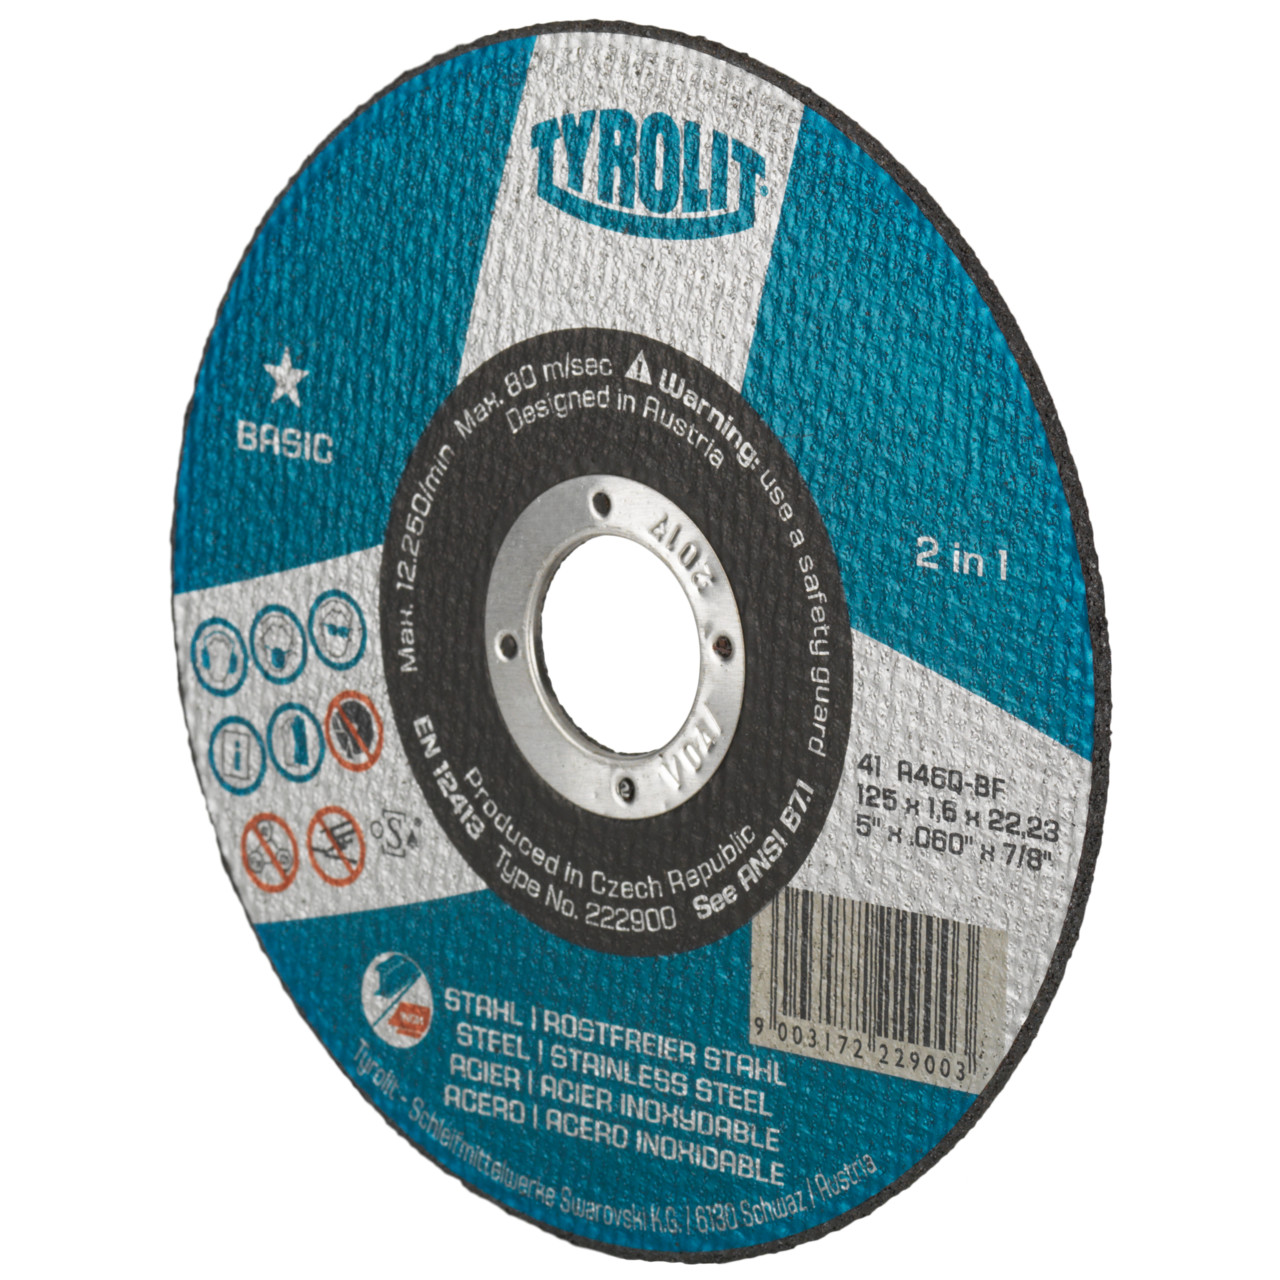 Tyrolit Cutting discs DxDxH 115x2.5x22.23 2in1 for steel and stainless steel, shape: 41 - straight version, Art. 222997